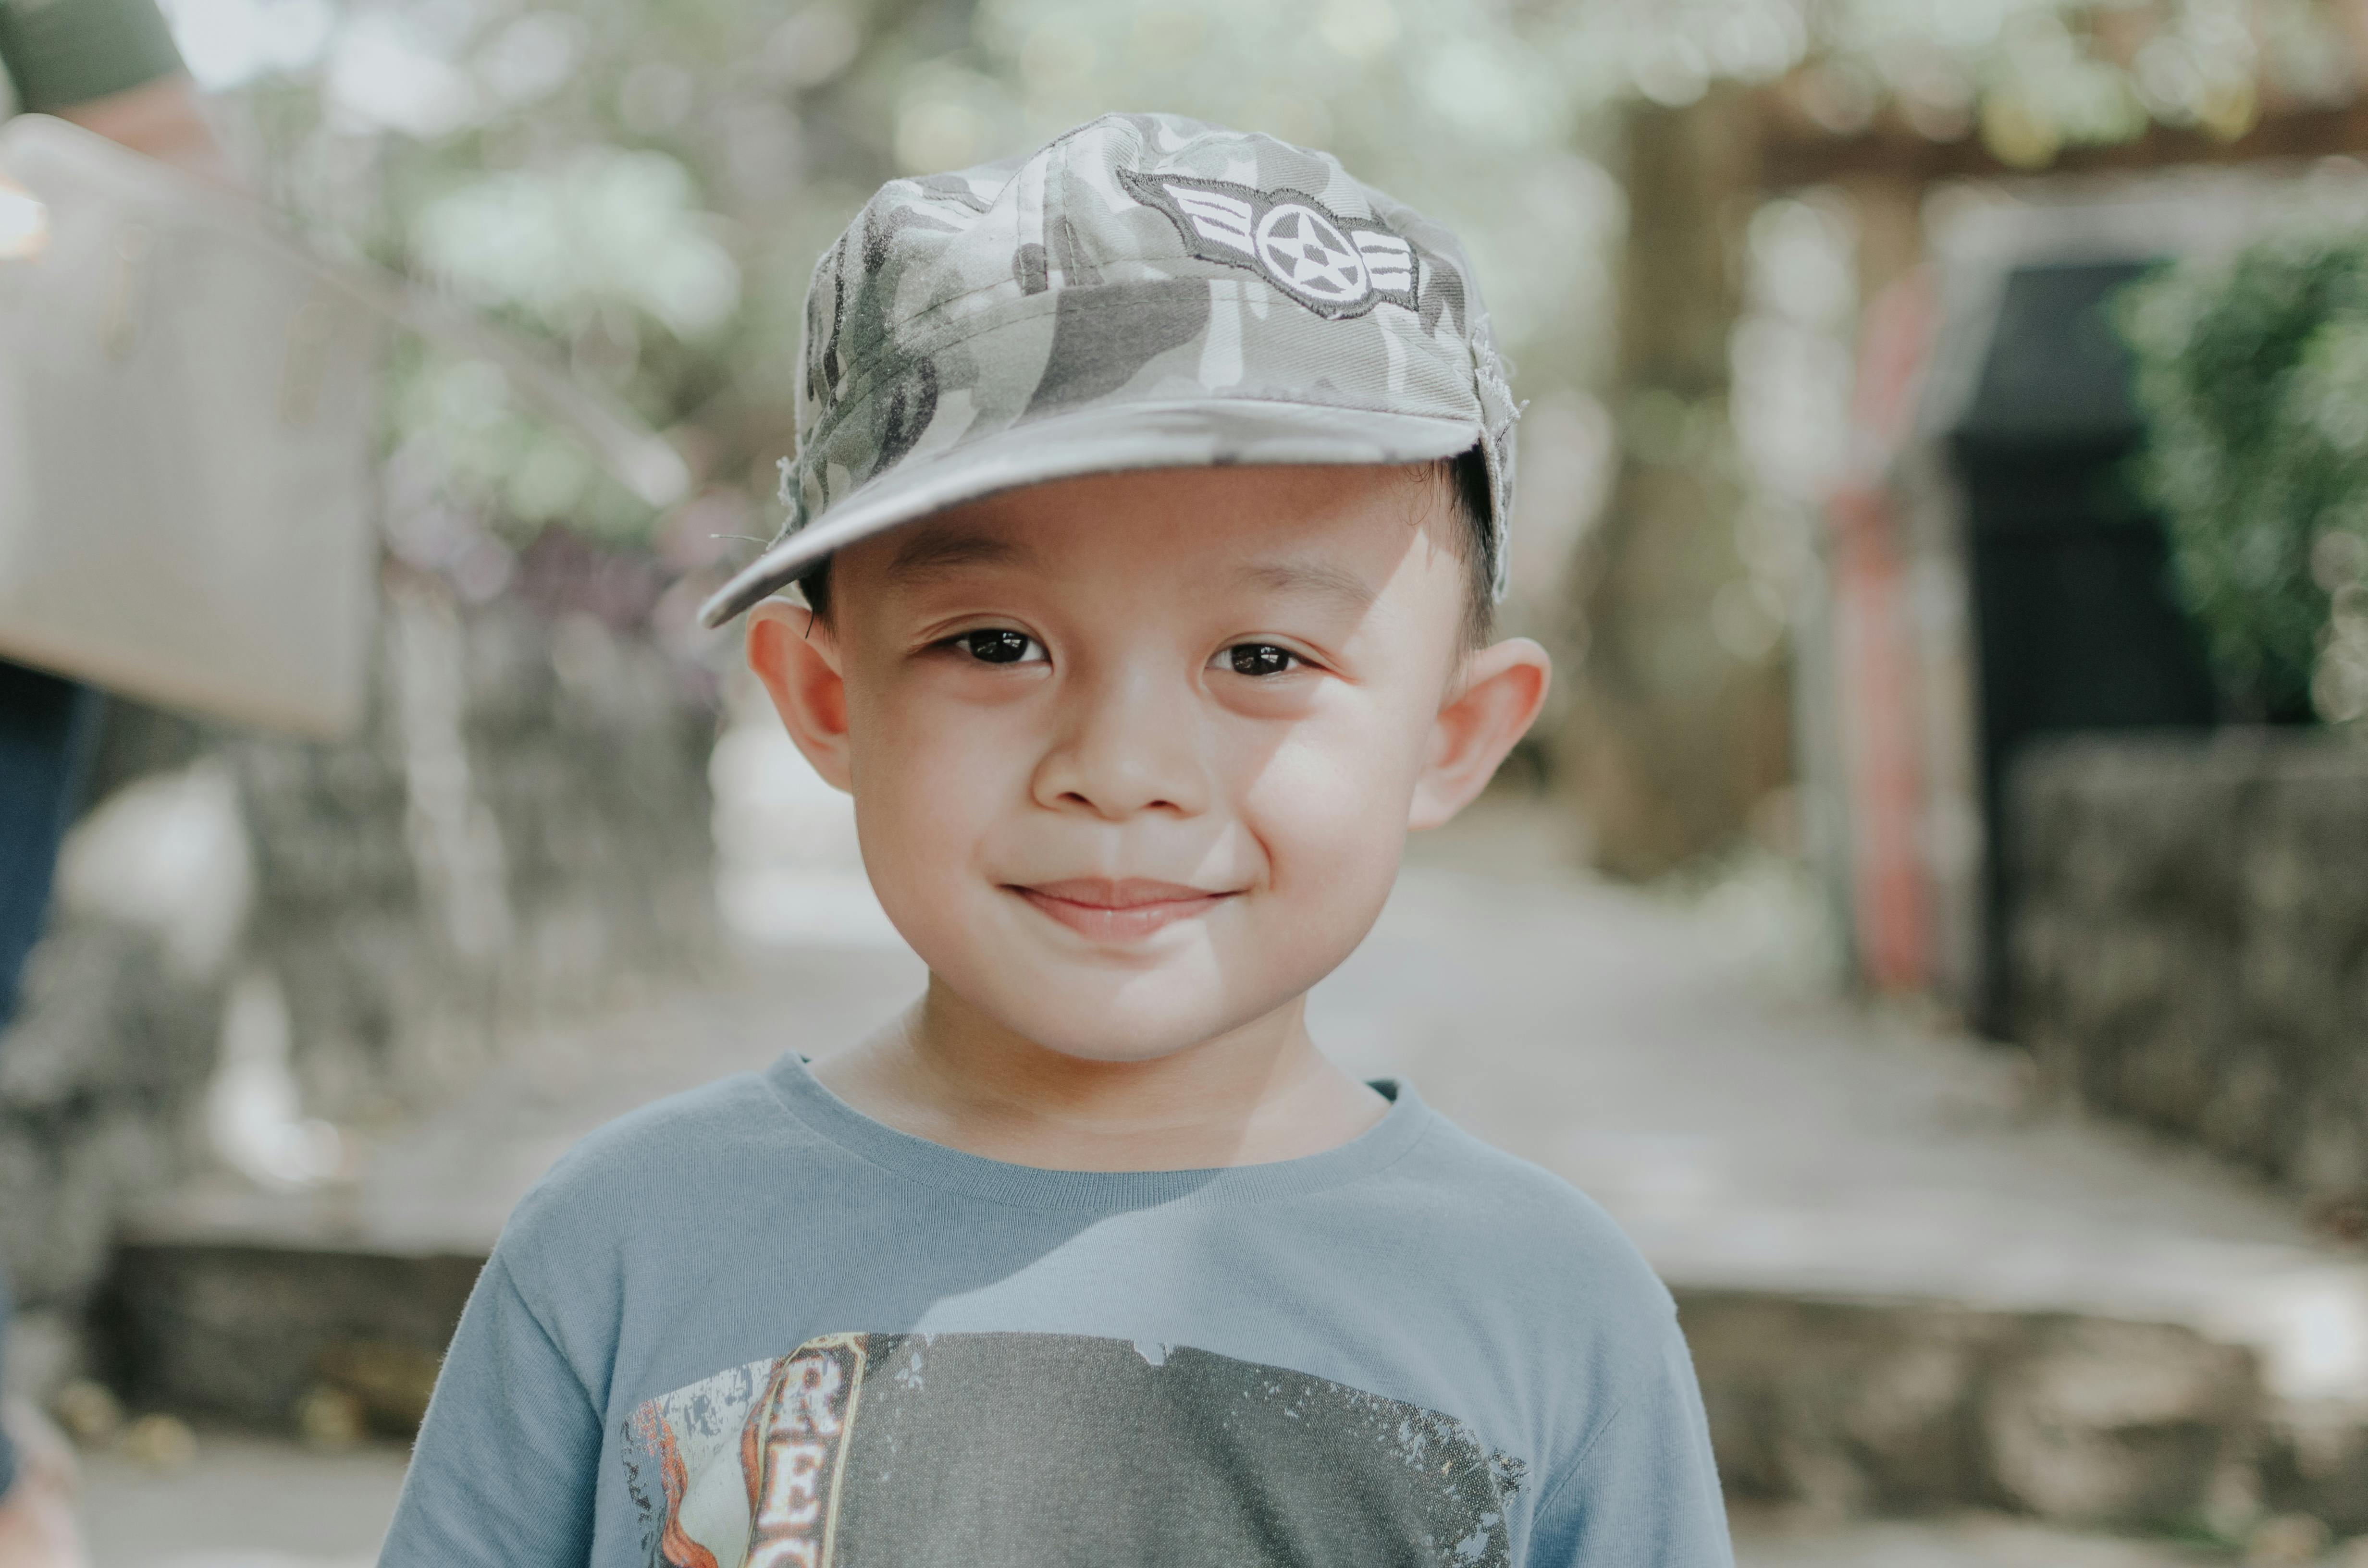 Selective Focus Portrait Photo of Smiling Boy in Camouflage Cap · Free ...